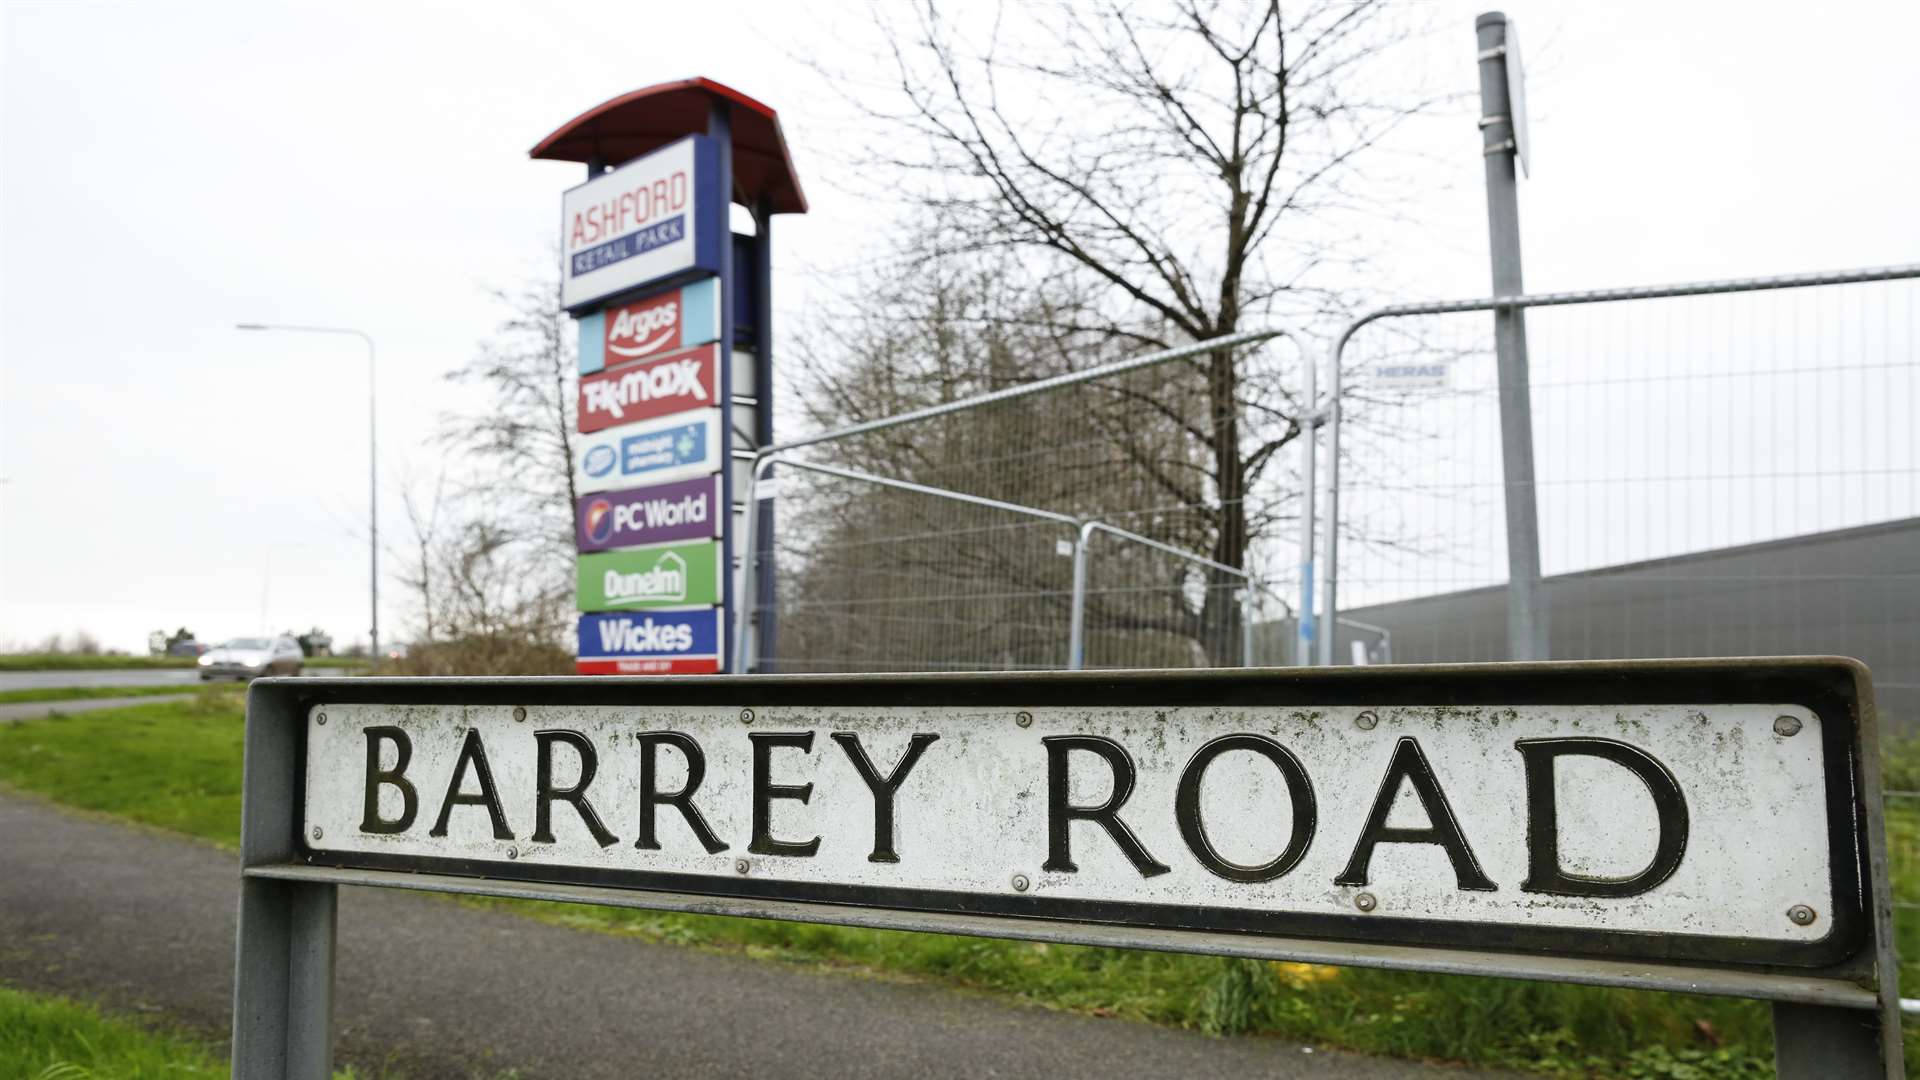 It will join the Barrey Road site